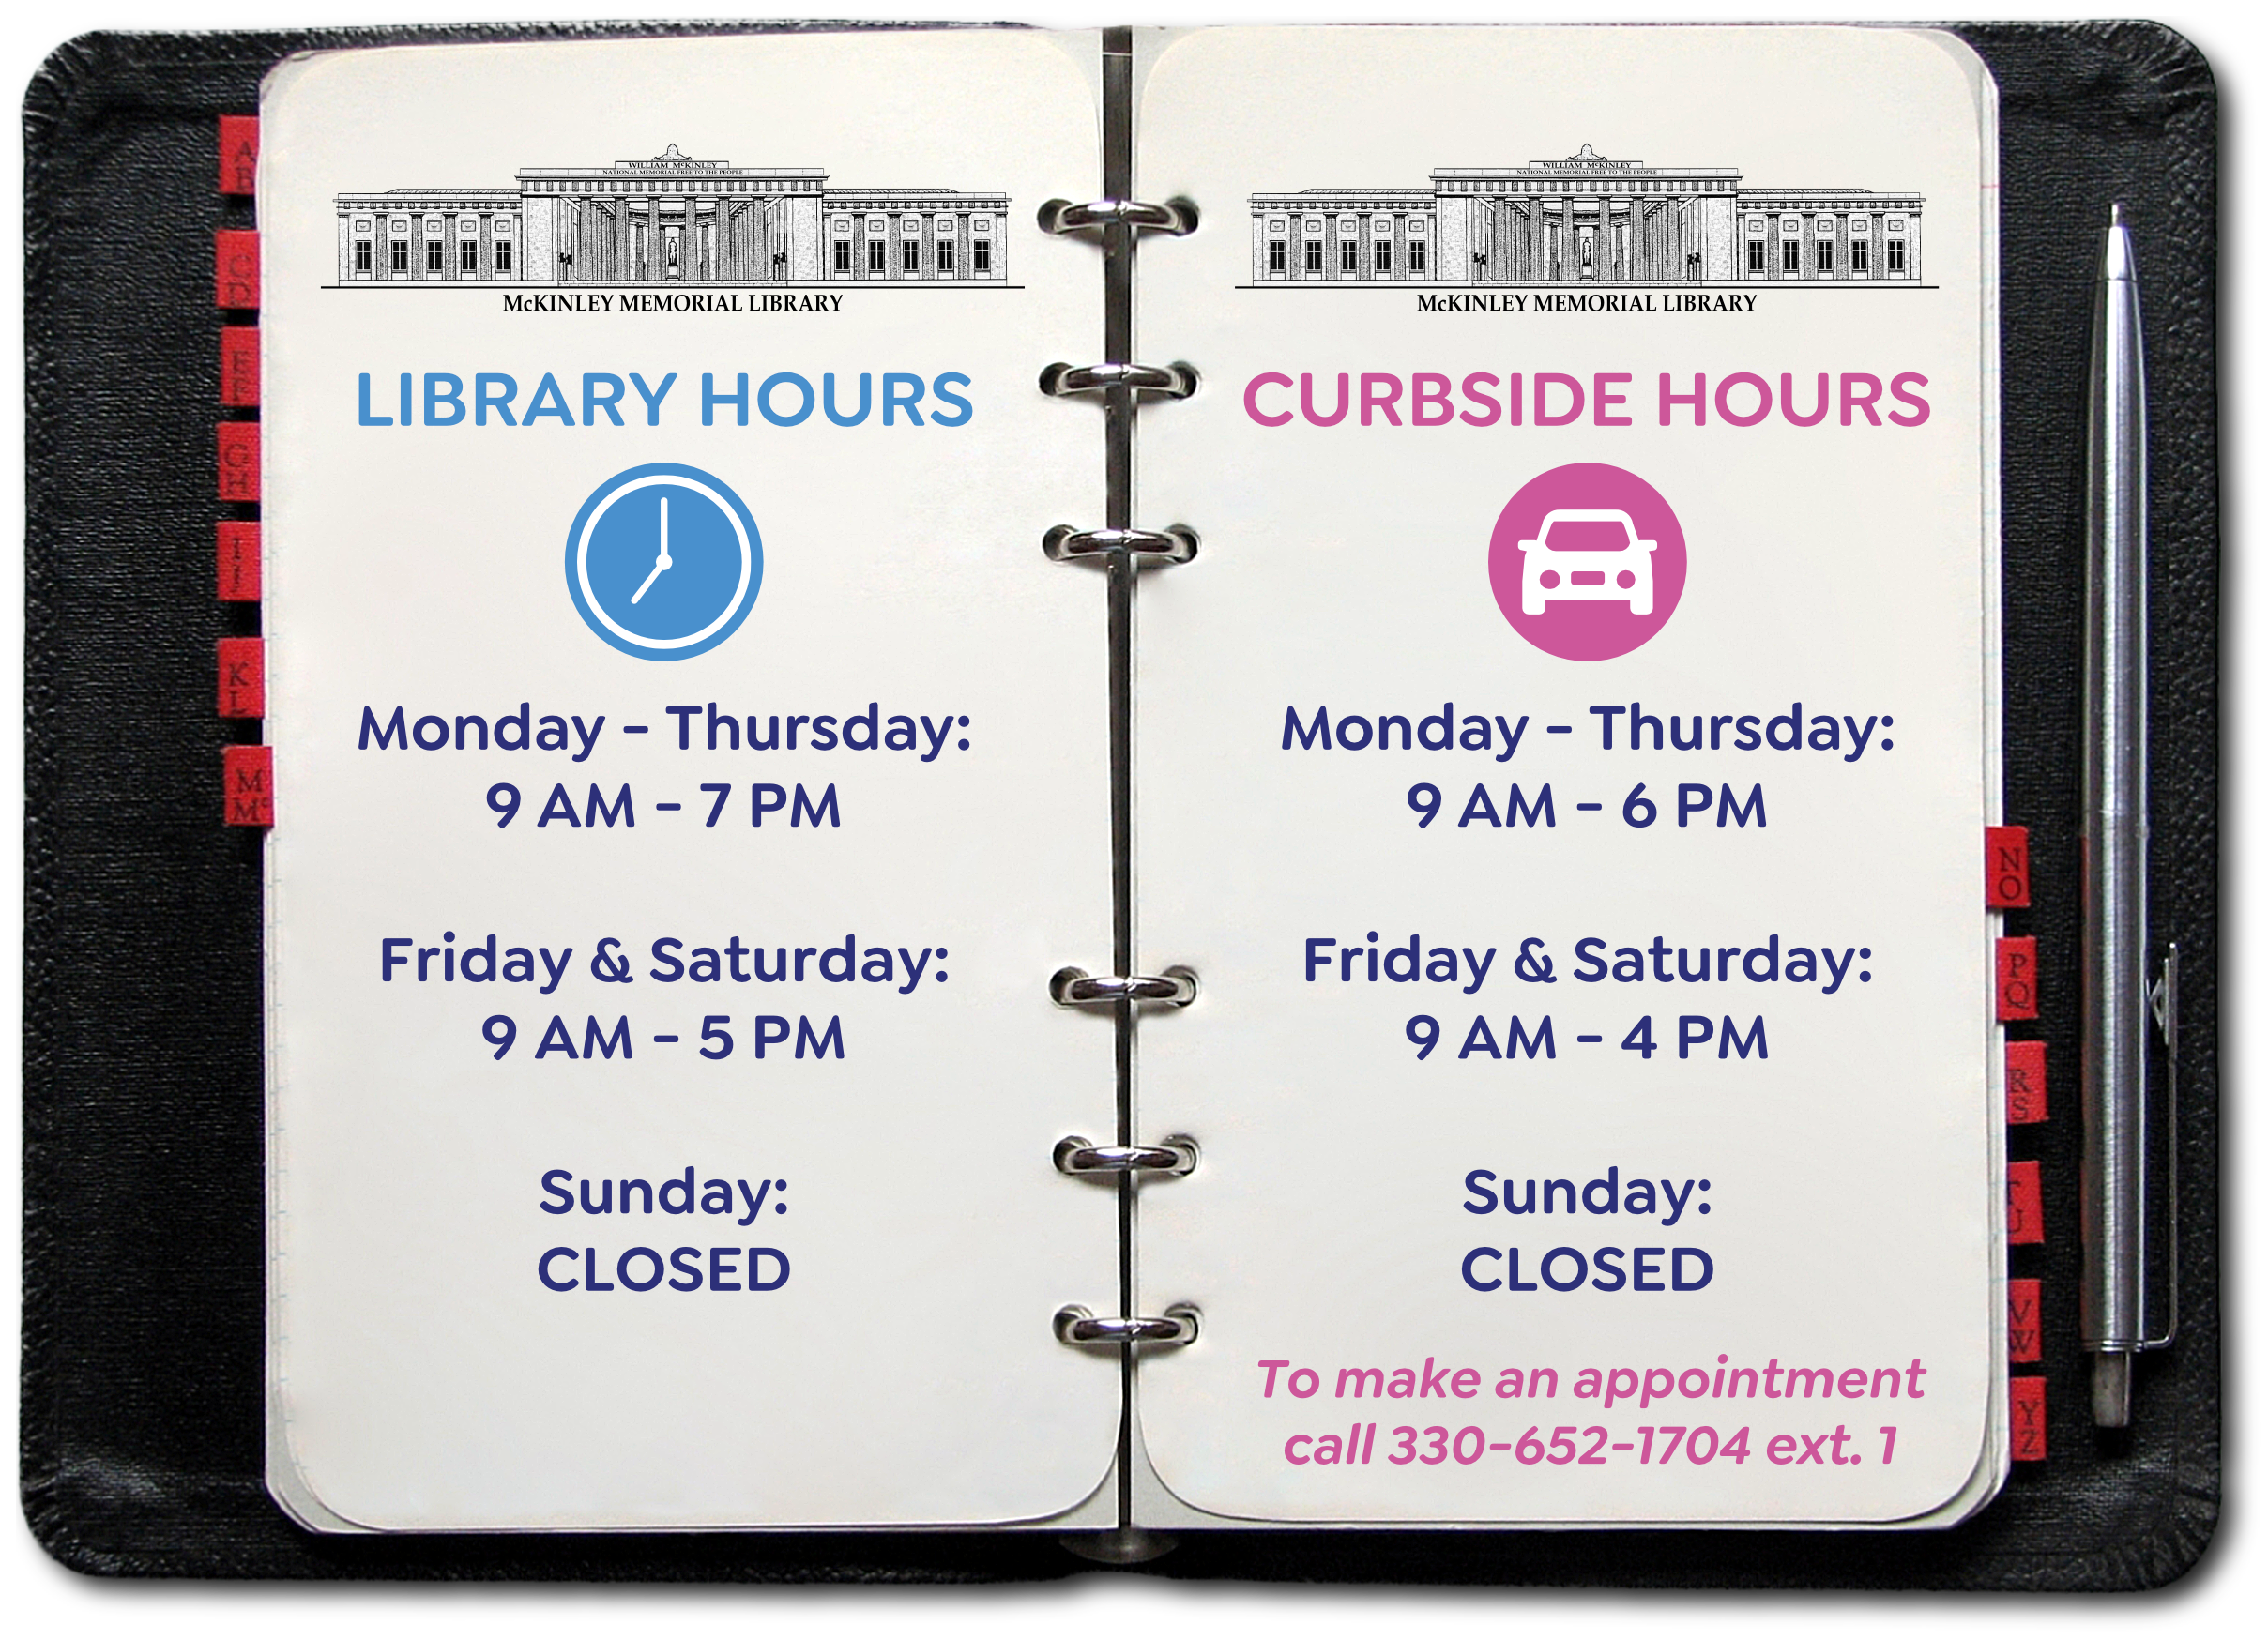 Appointment booklet with open pages showing Library Hours, Curbside Hours